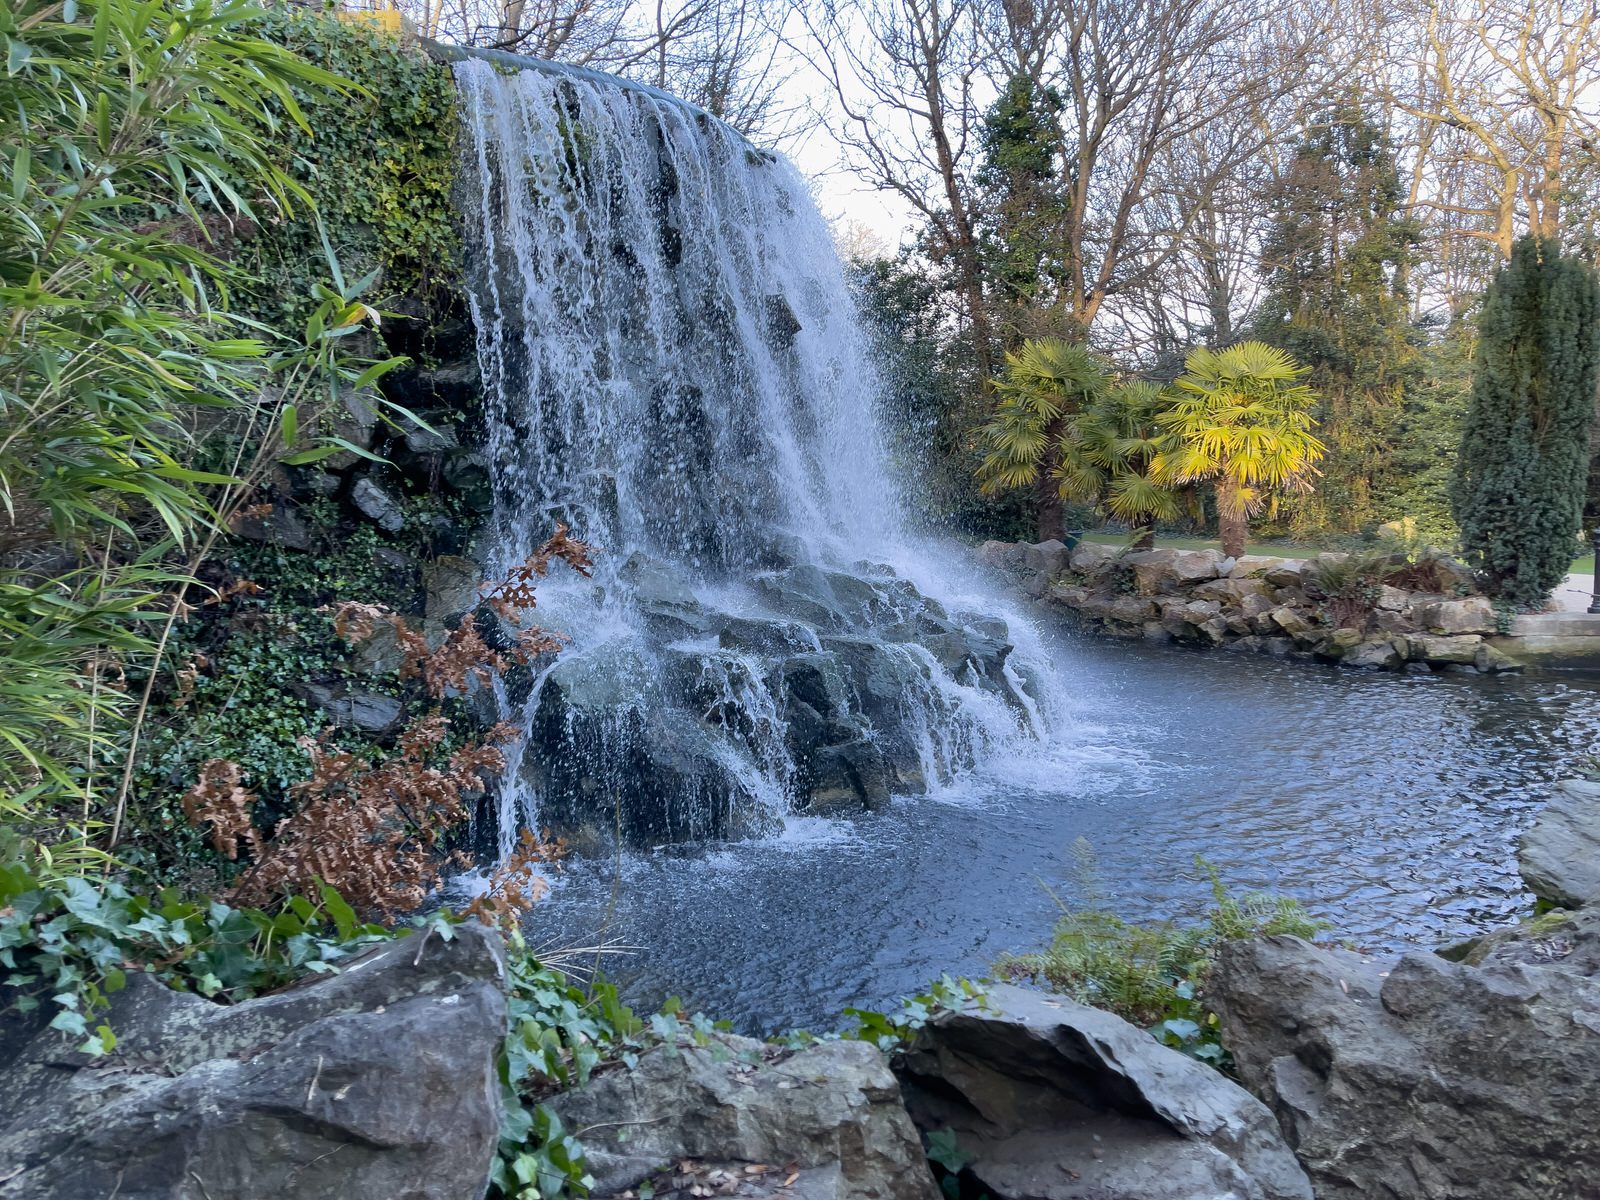 WATER FEATURES AT IVEAGH GARDENS 007